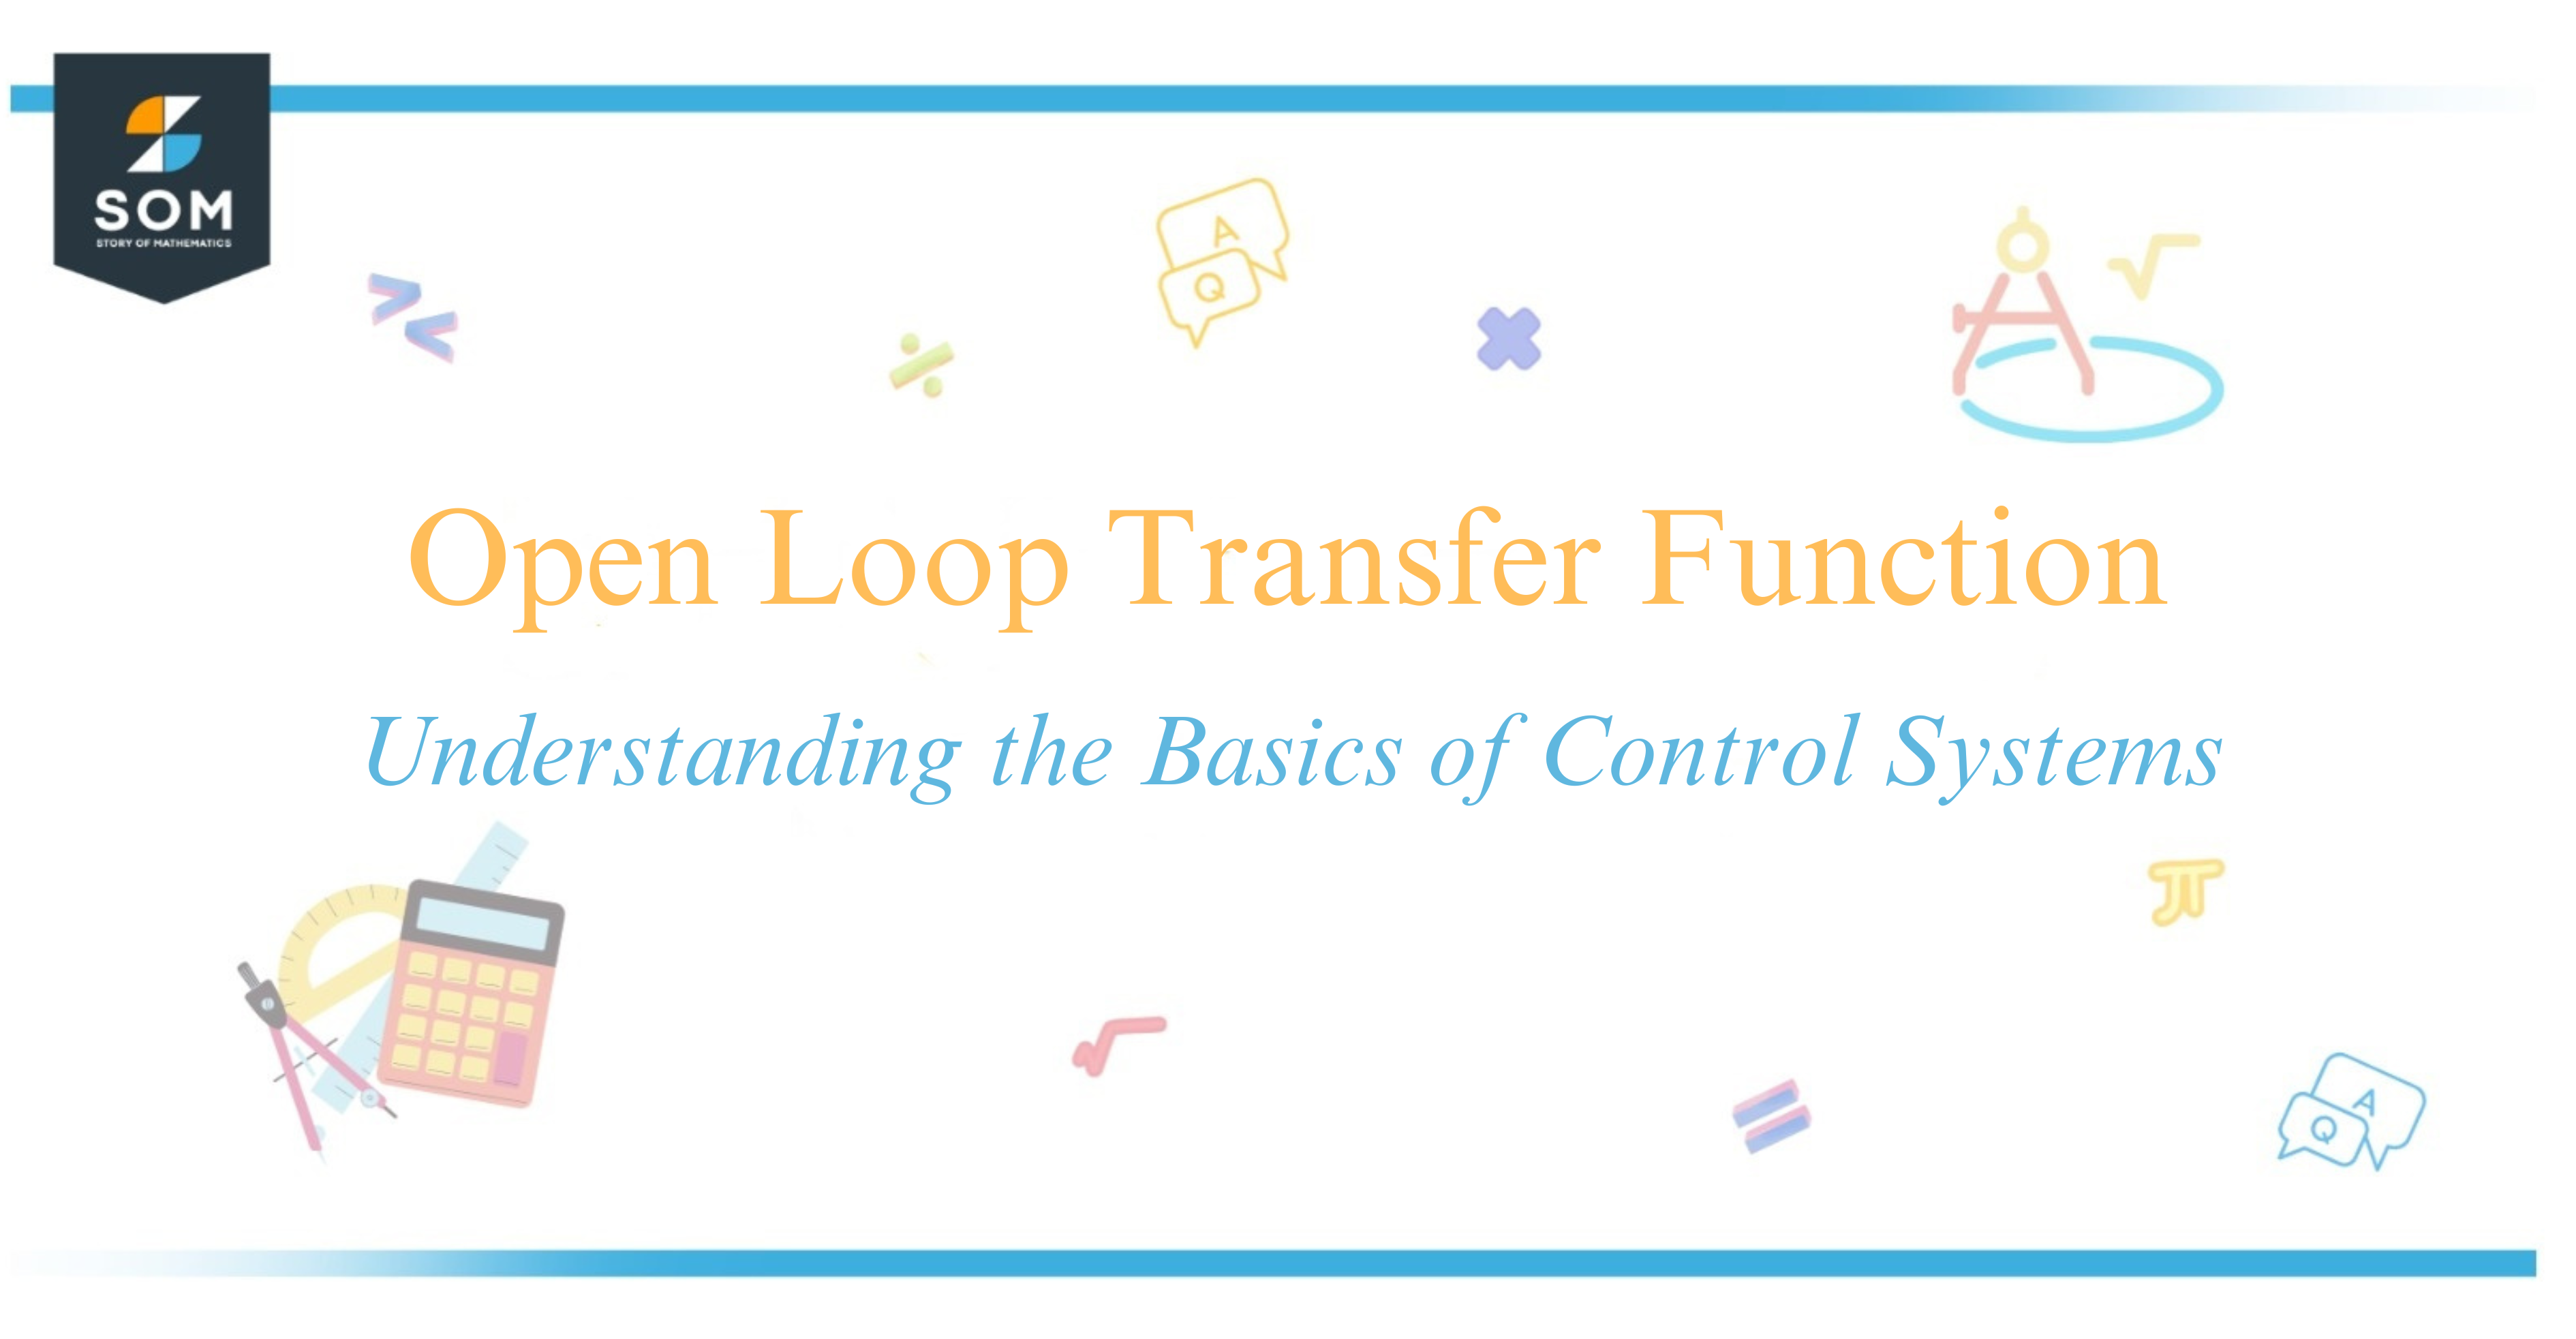 Open Loop Transfer Function Understanding the Basics of Control Systems